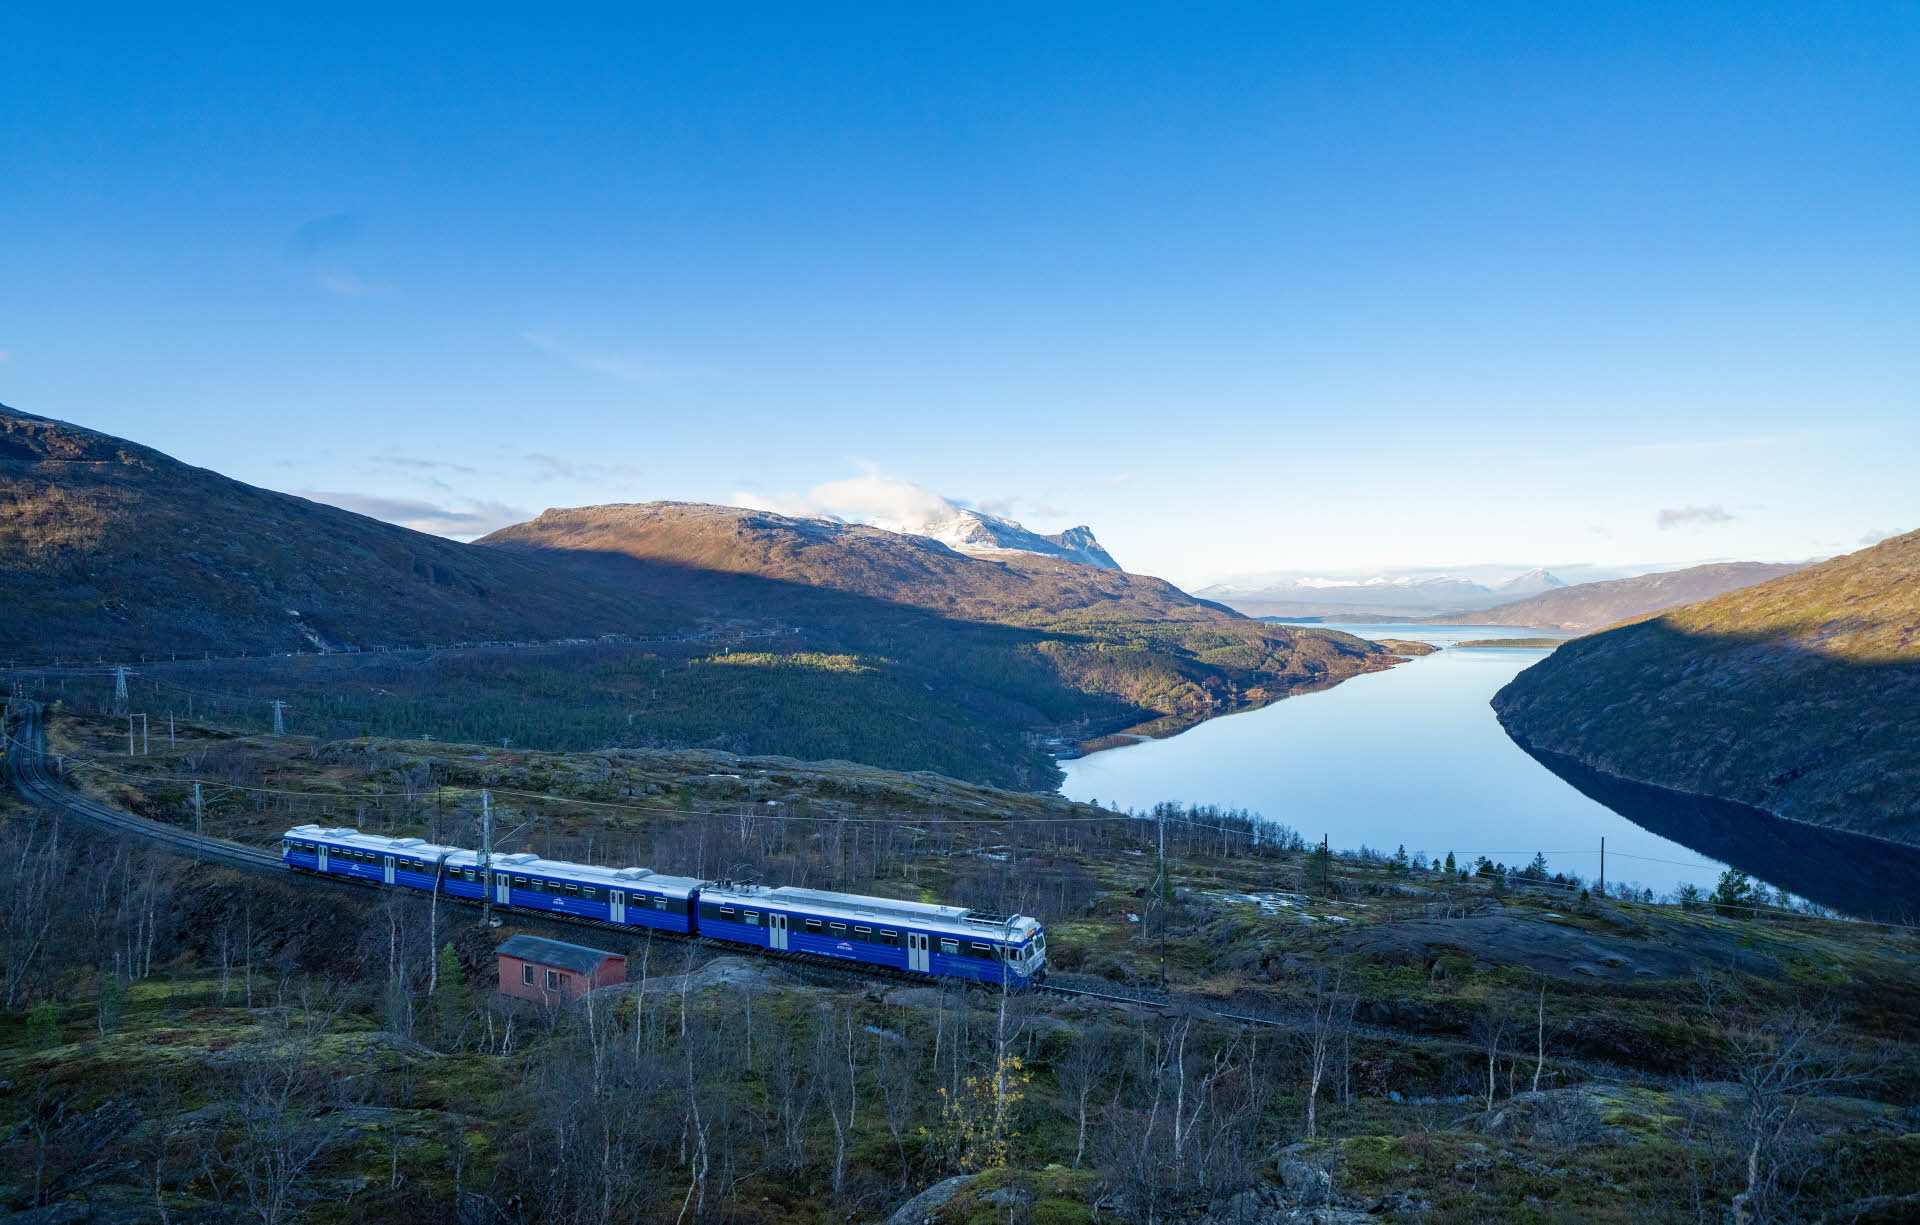 The Arctic Train passing a small red cabin on the Ofot Railway, travelling towards Narvik with the Rombaksfjord and mountains in the background